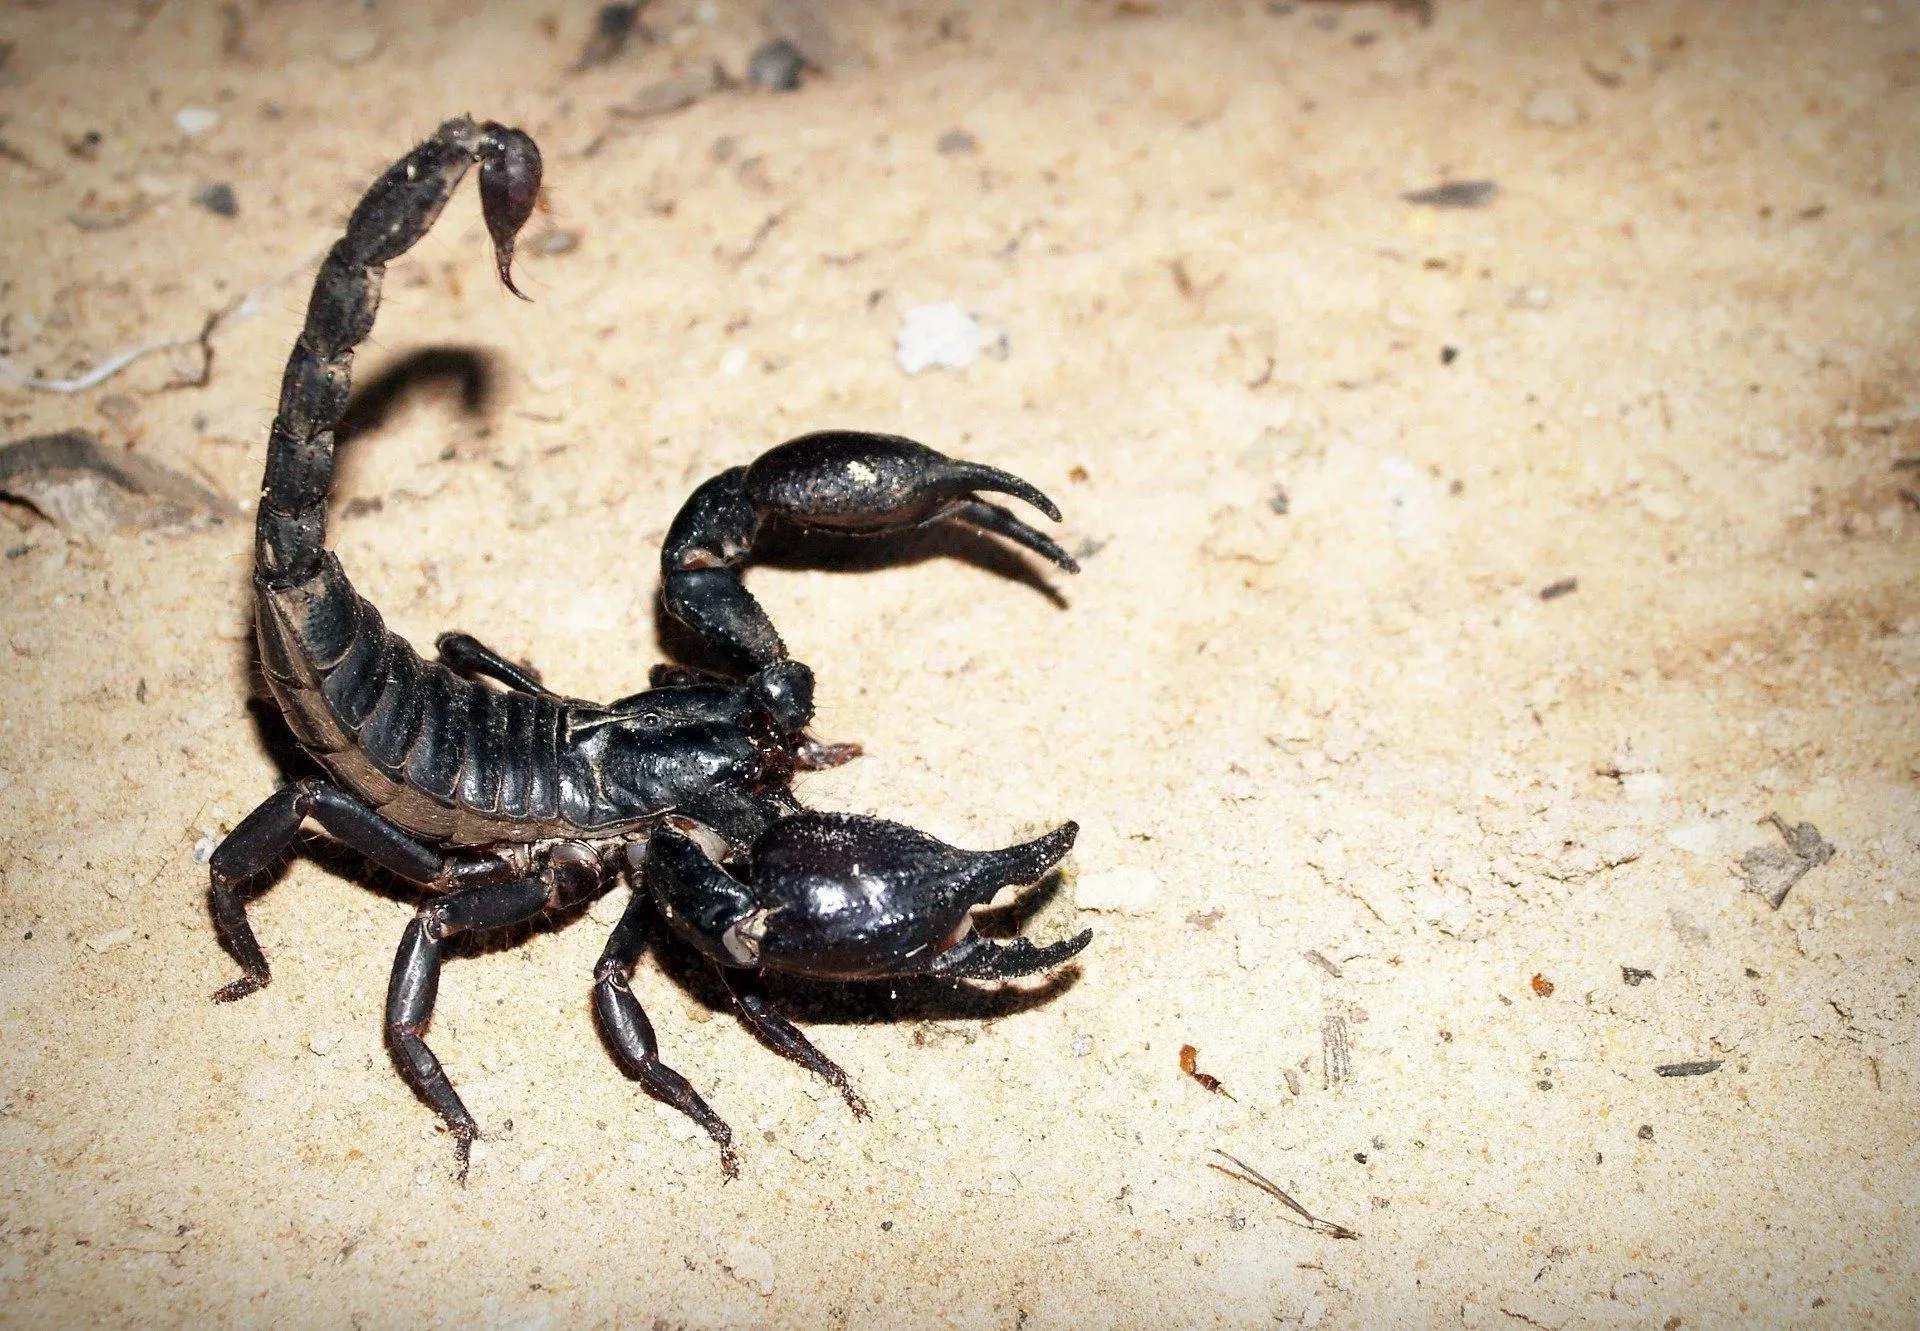 A famous fact about is a scorpion an insect or not, is that they are arthropods, not insects.